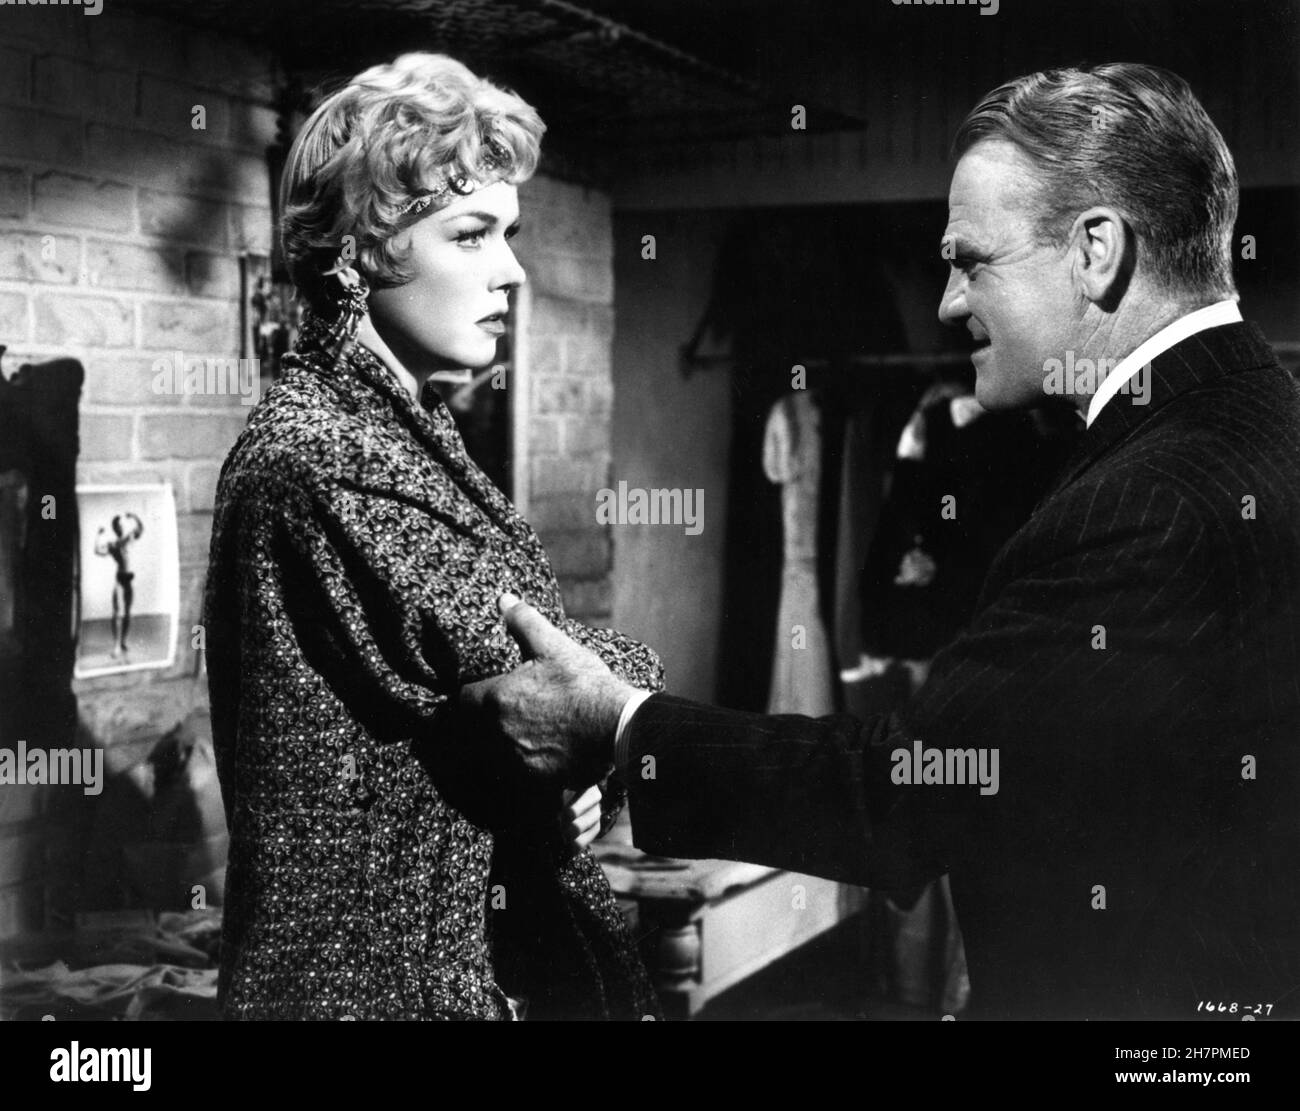 DORIS DAY as Ruth Etting and JAMES CAGNEY as gangster Marty Snyder in ...